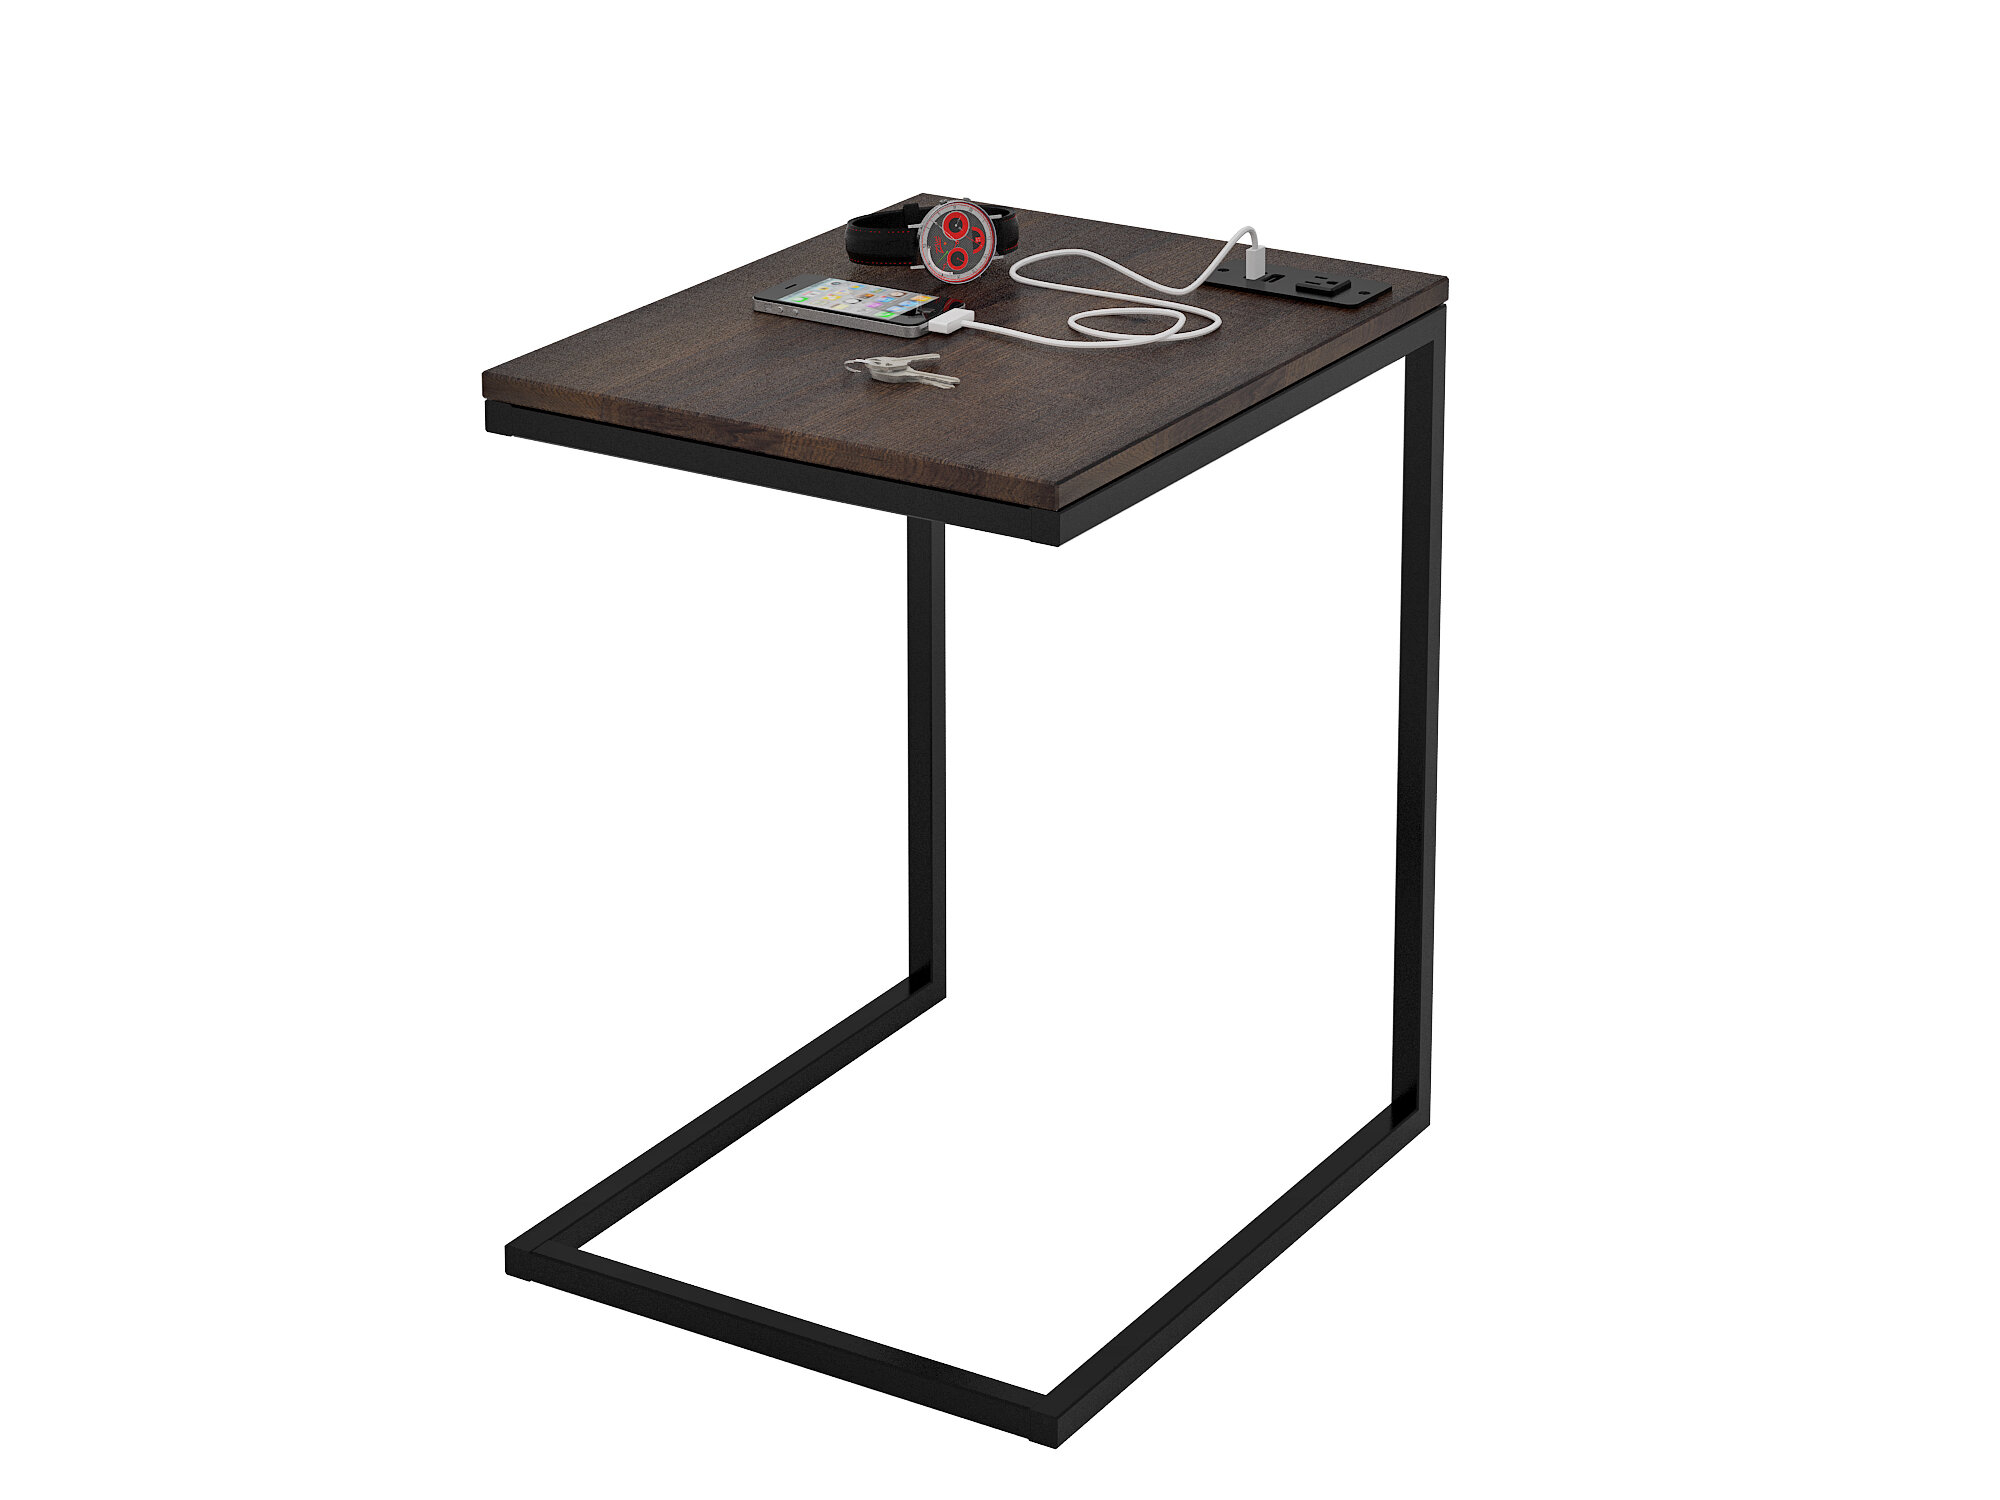 End Table With Charging Station, White End Table With Built In Lamp And Usb Port Black